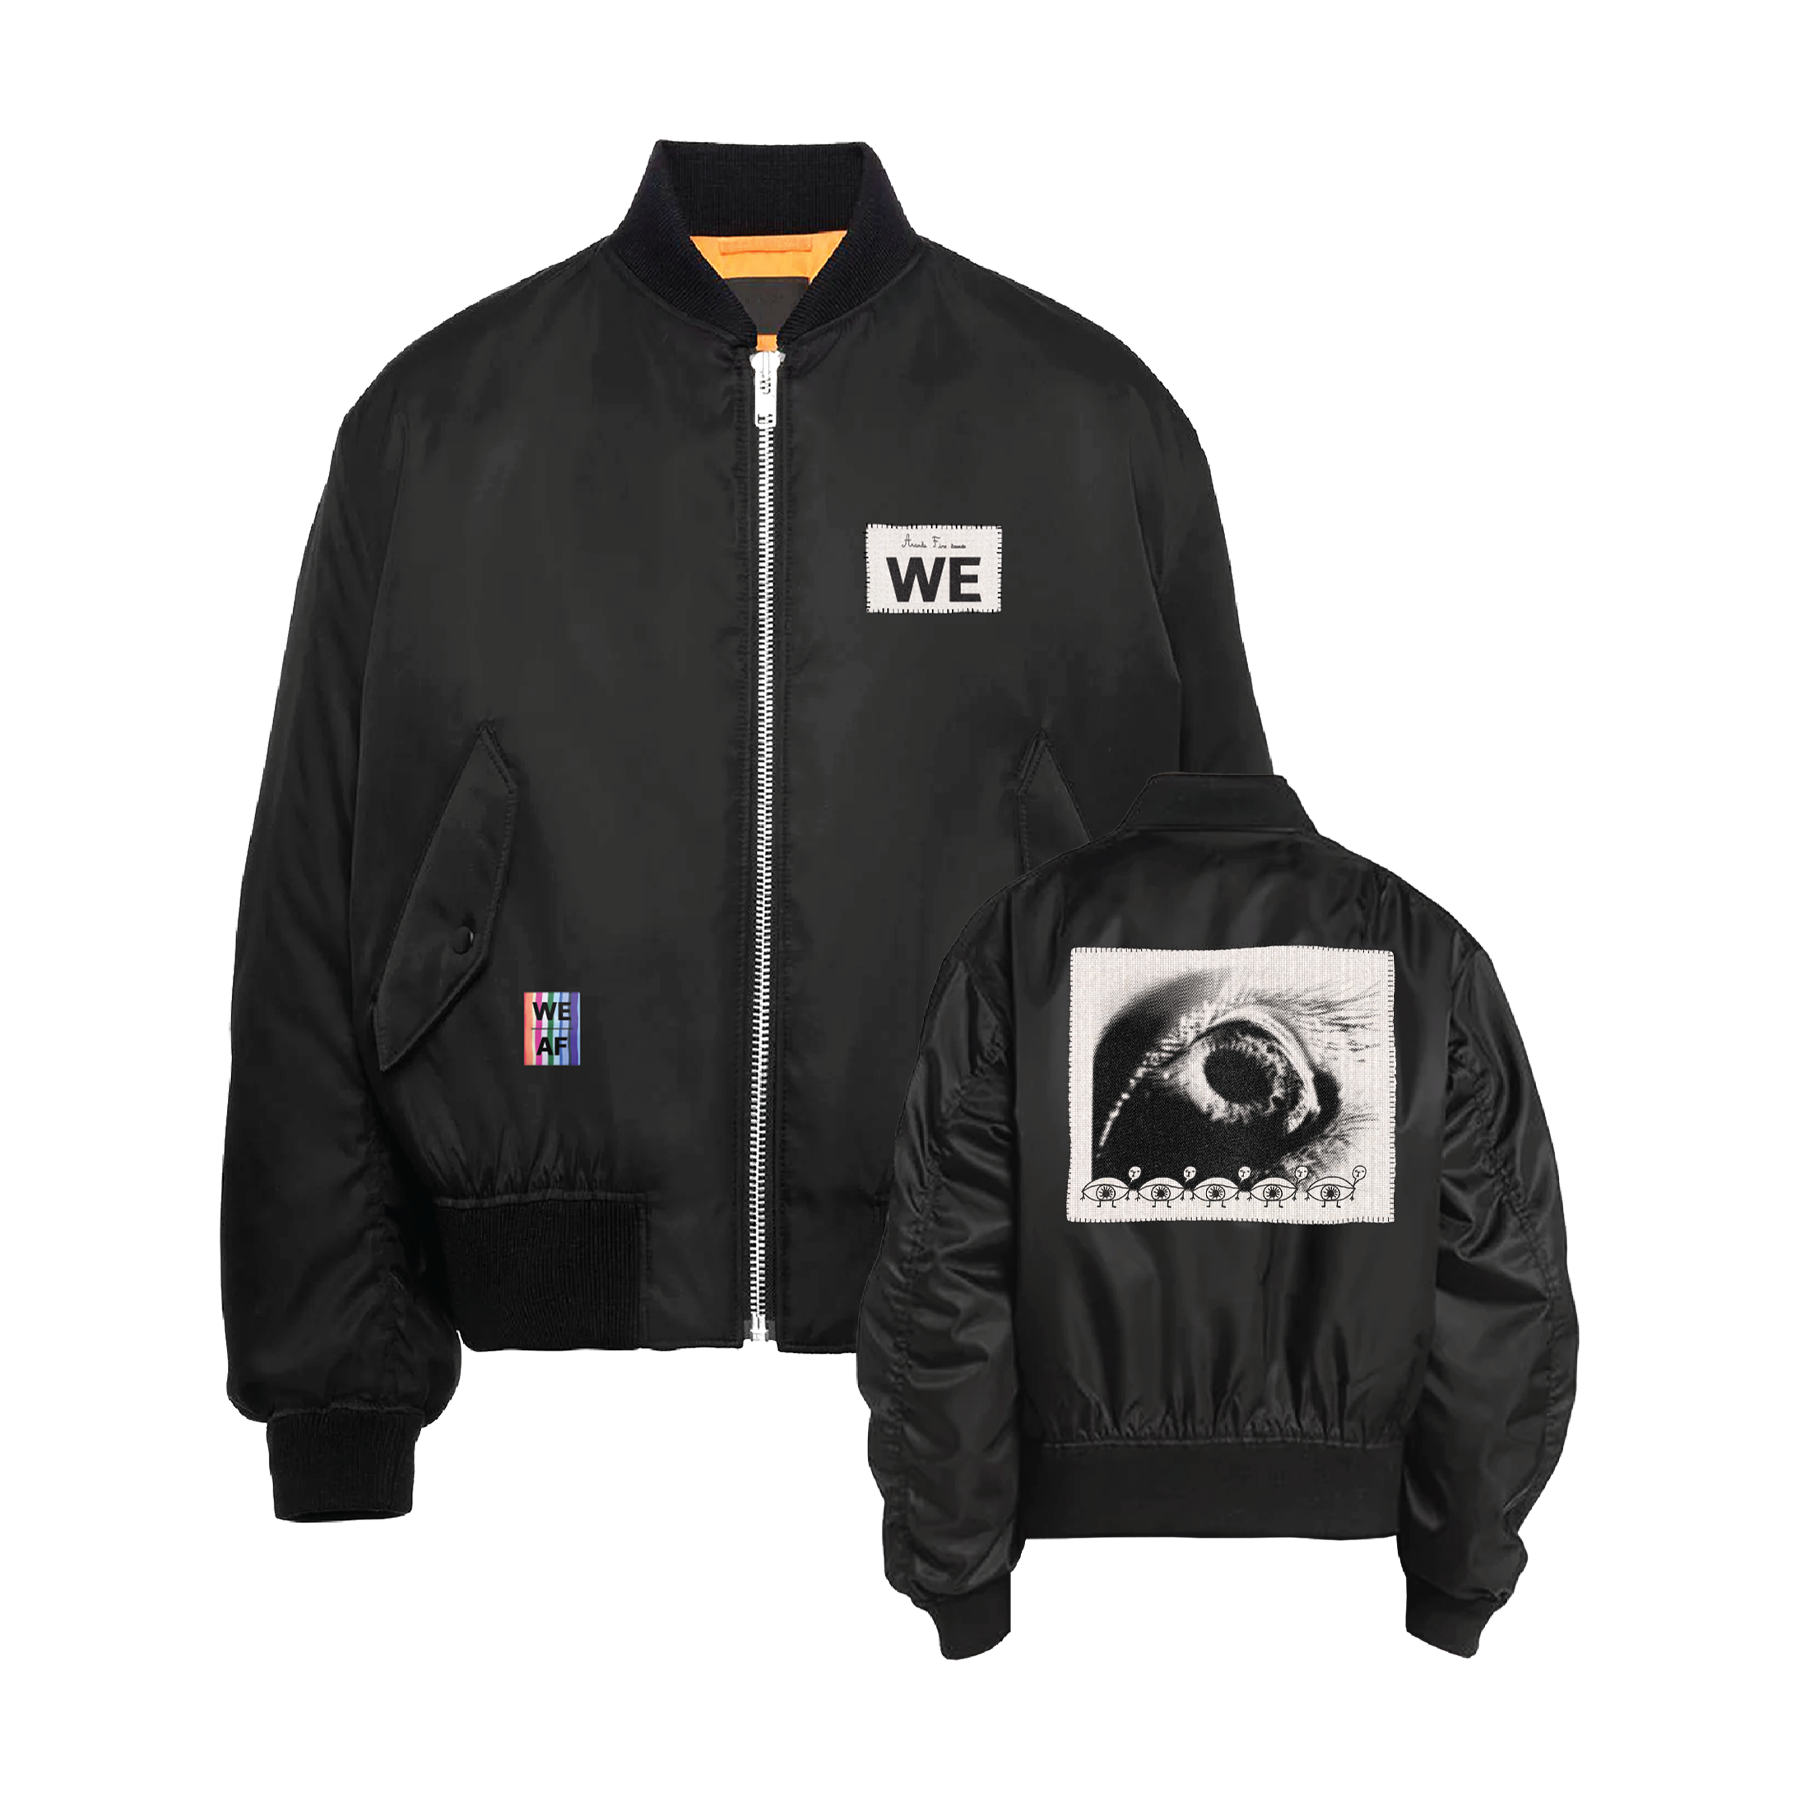 WE Bomber Jacket | Arcade Fire US | The Official Store